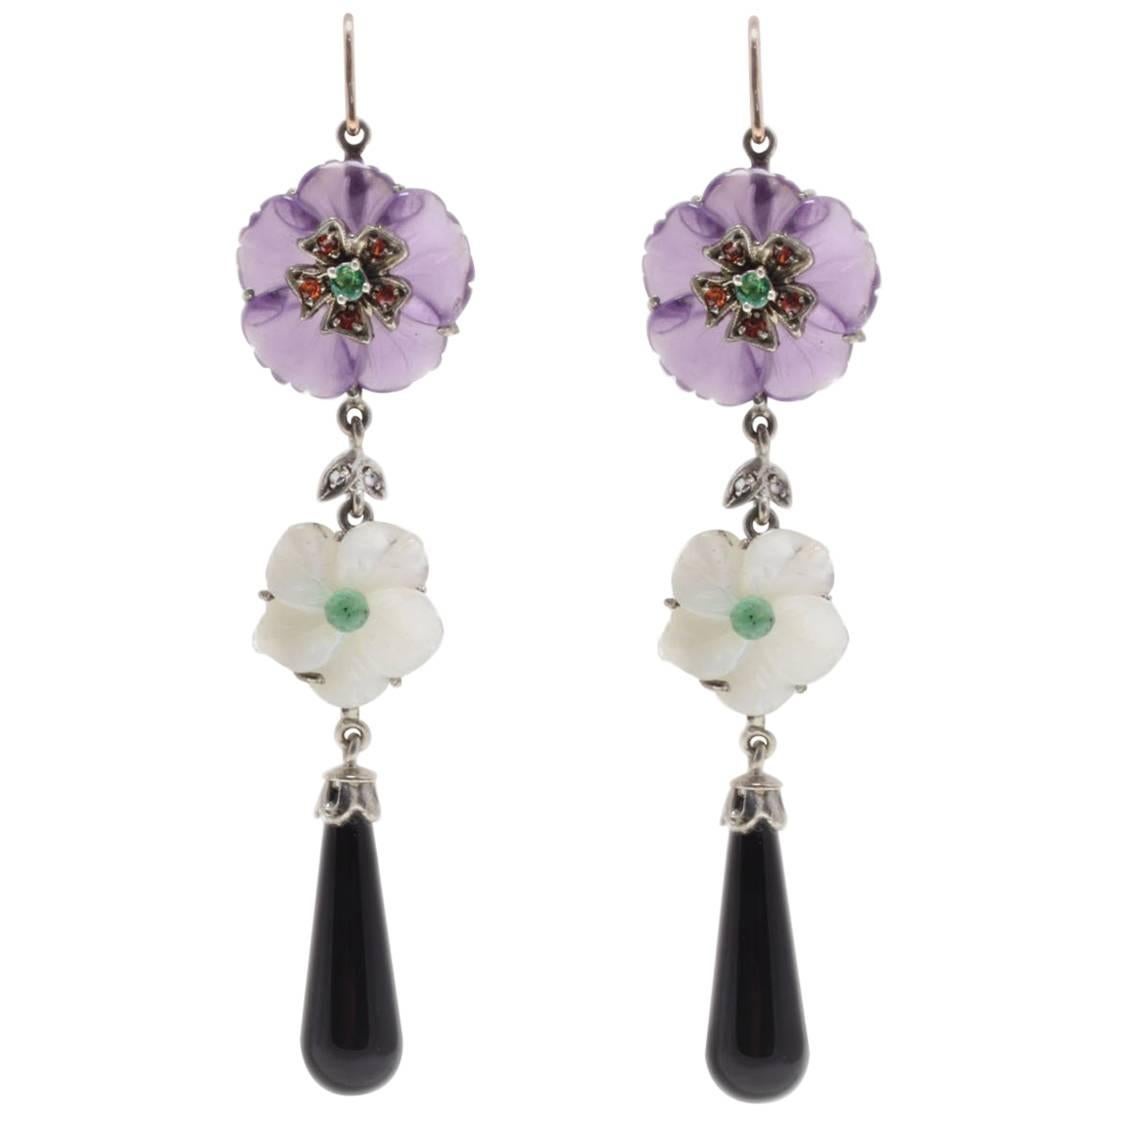  Amethyst, Onyx and Mother-of-Pearl Drop Rose Gold and Silver Earrings